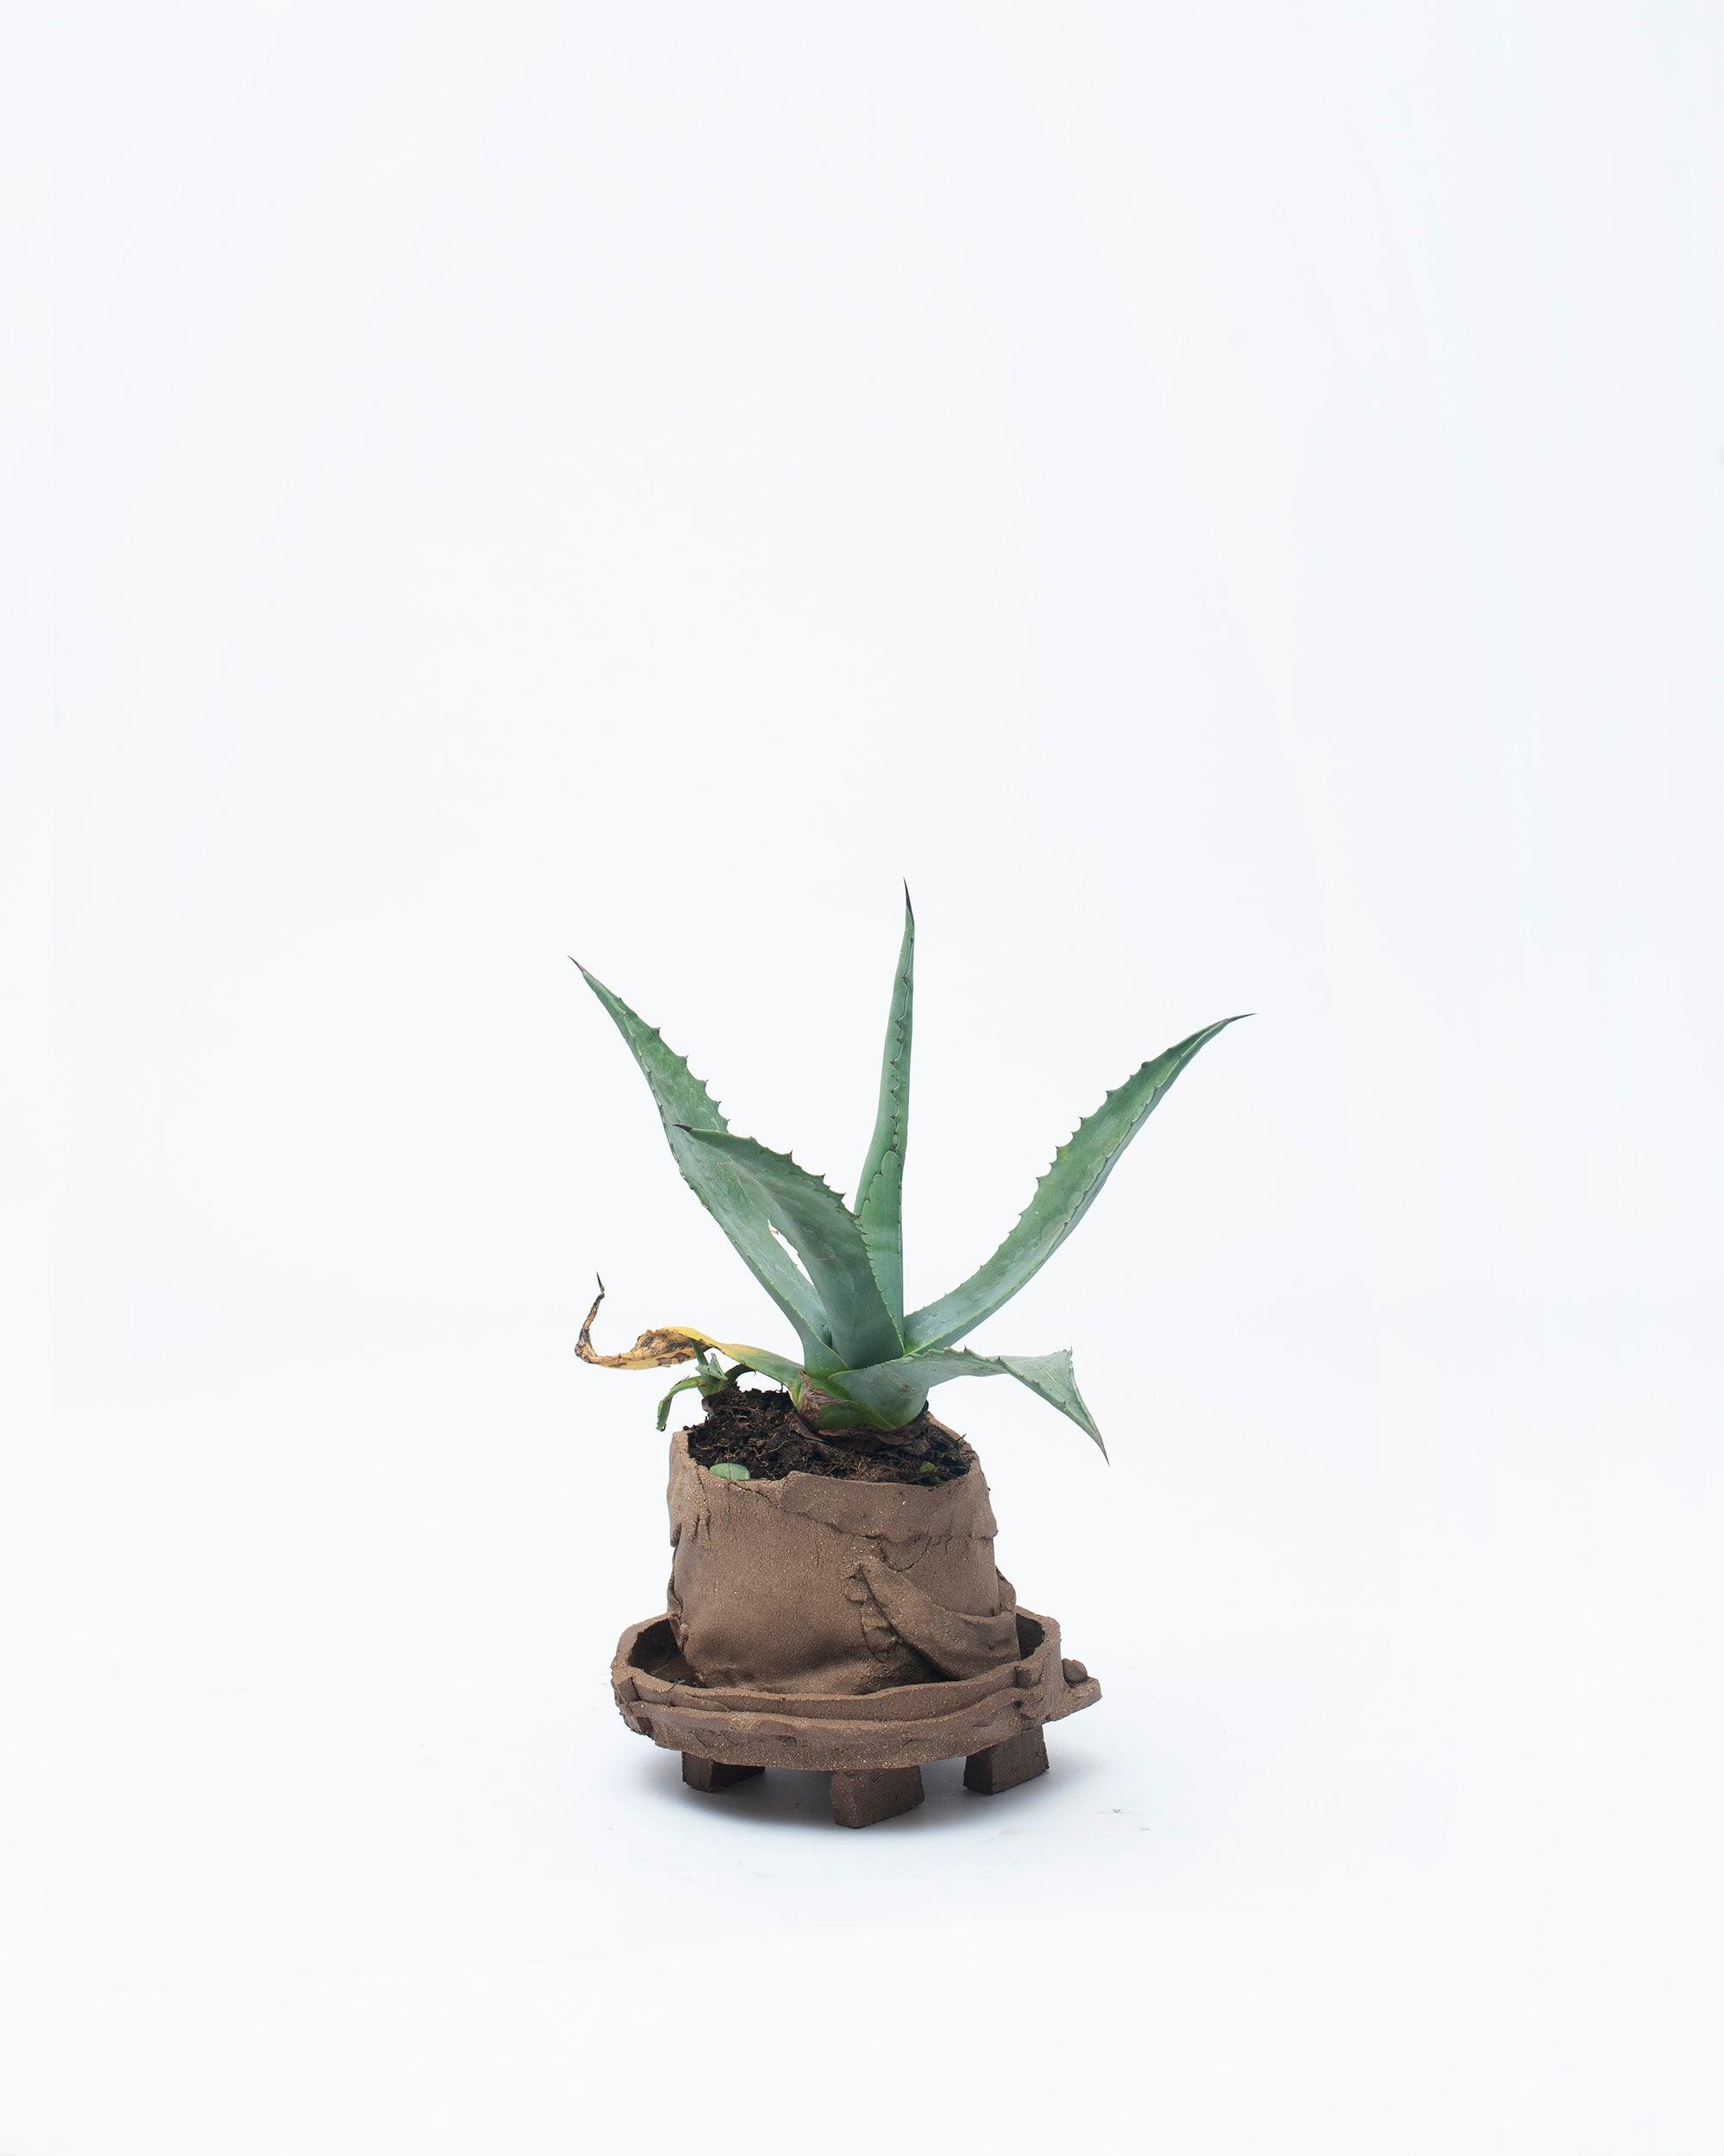 Brown old hat small plant in inclined position on white background